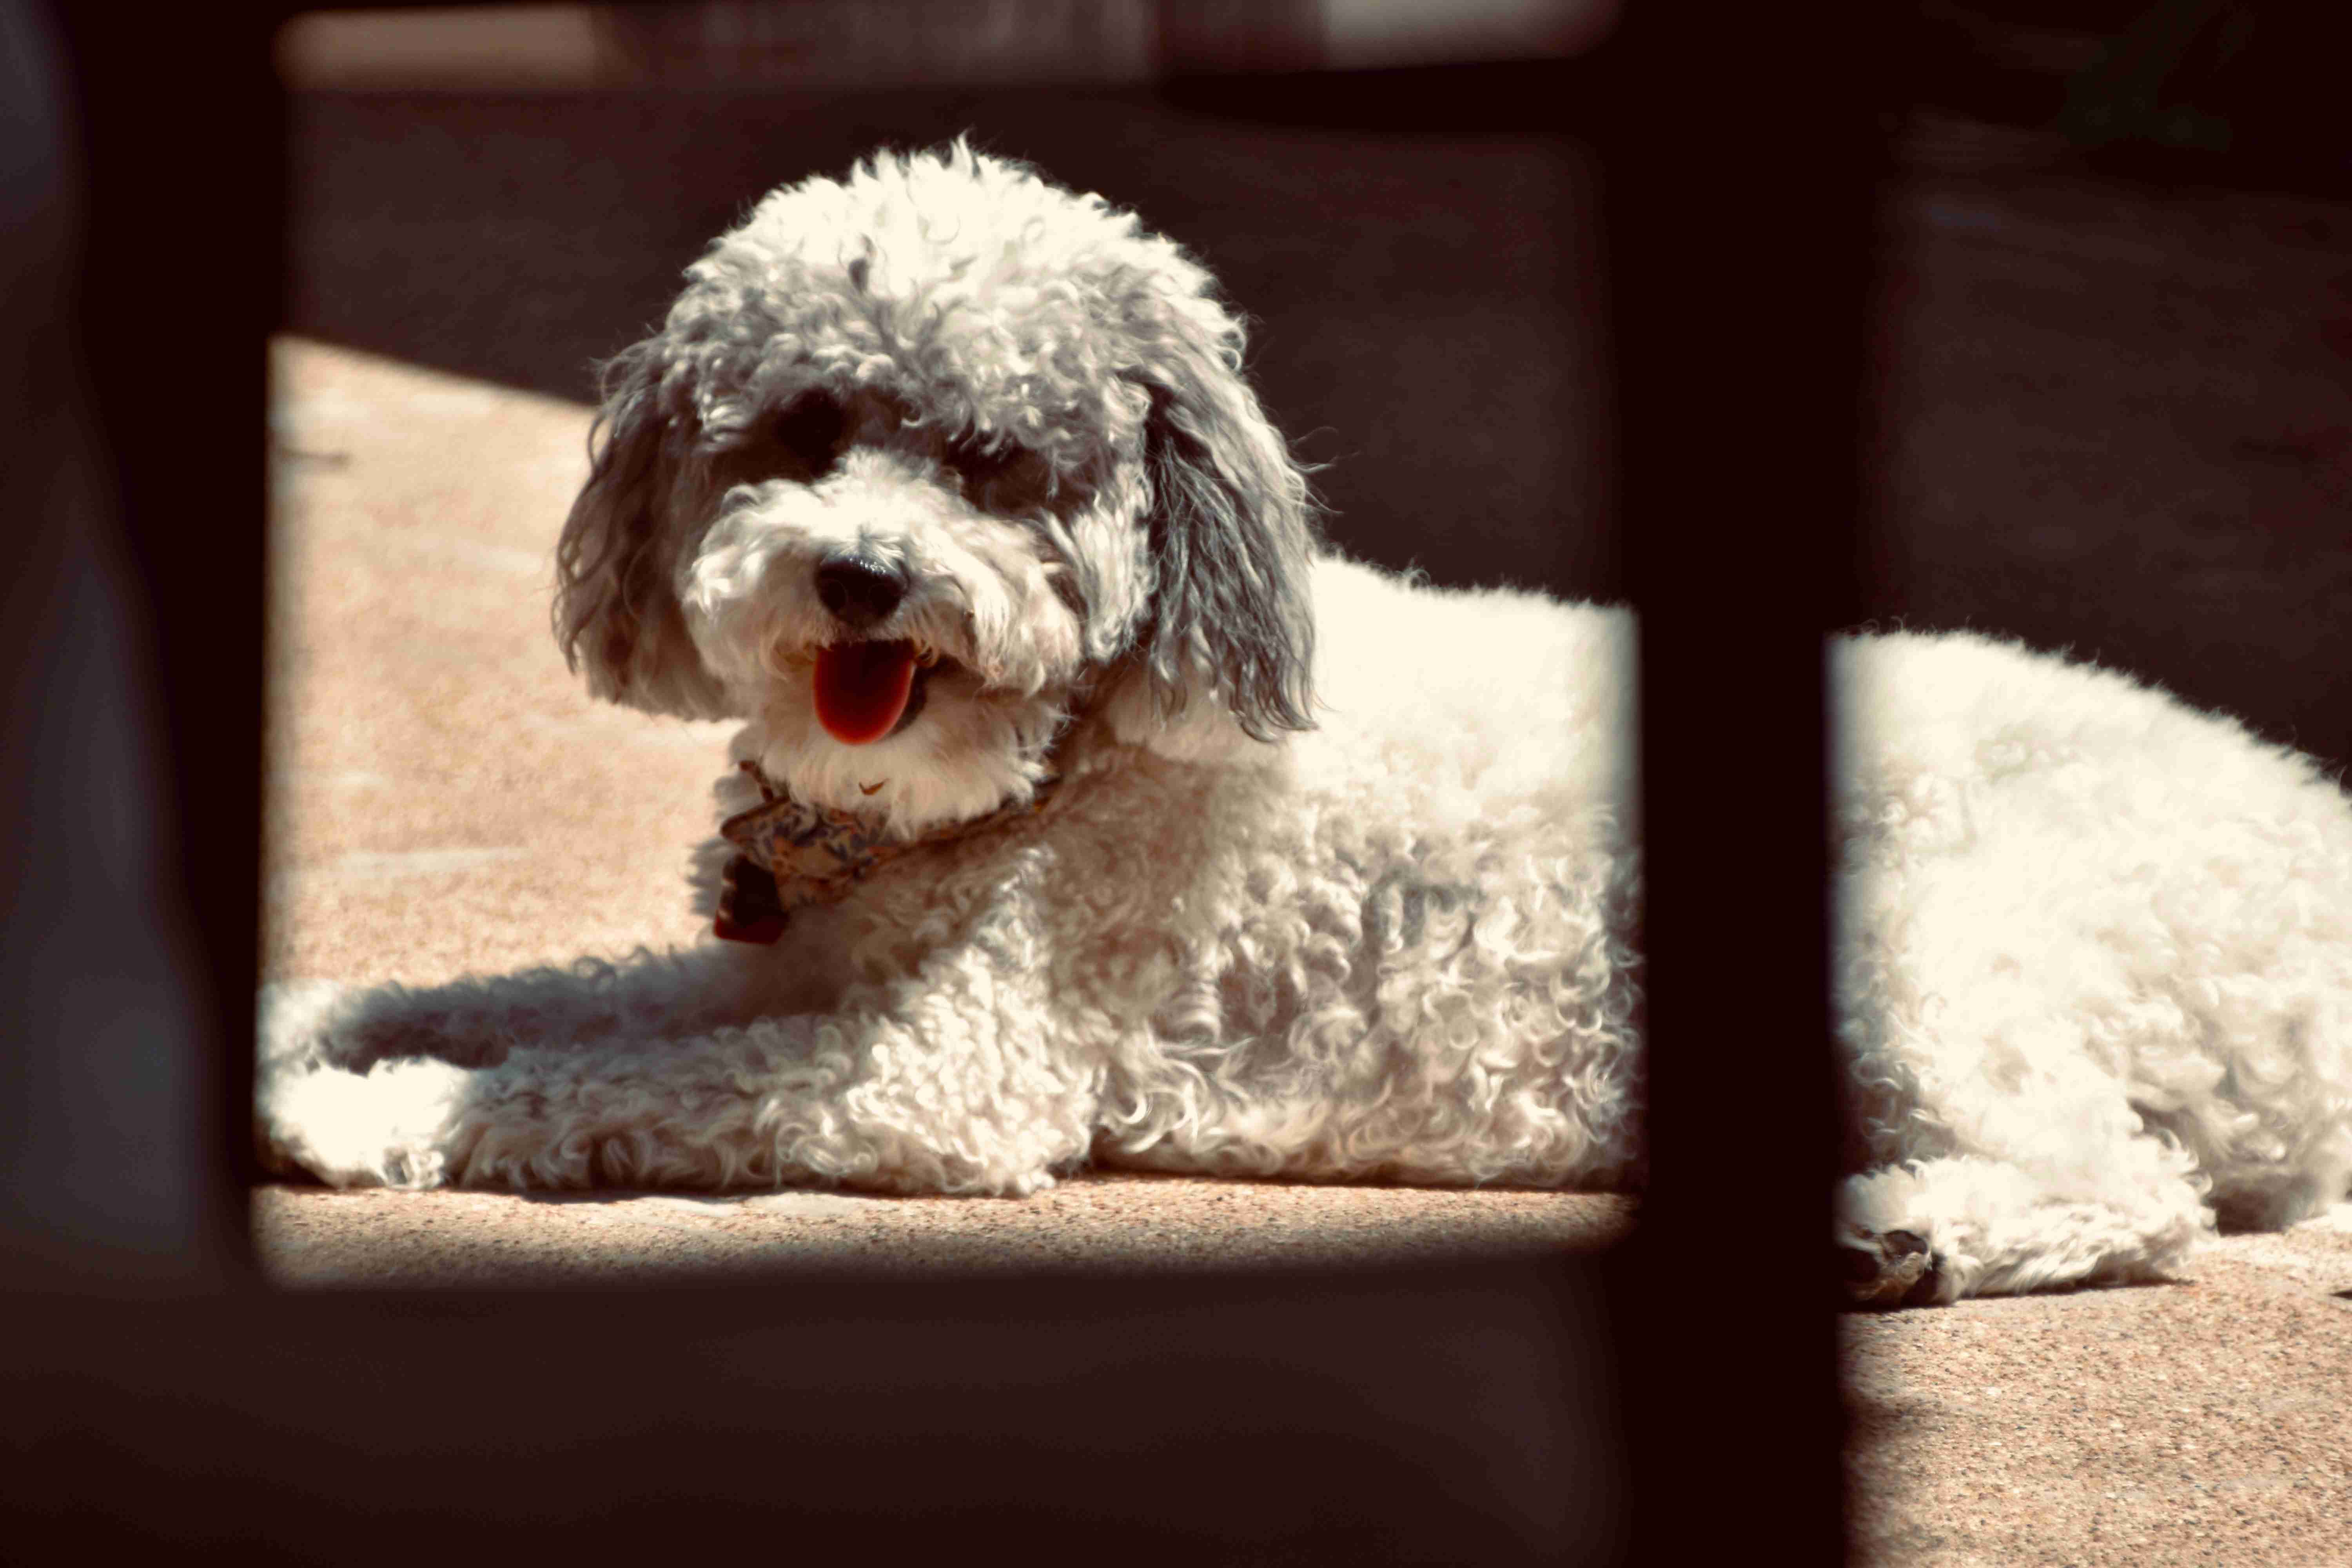 Are Poodles more prone to certain types of cancer?